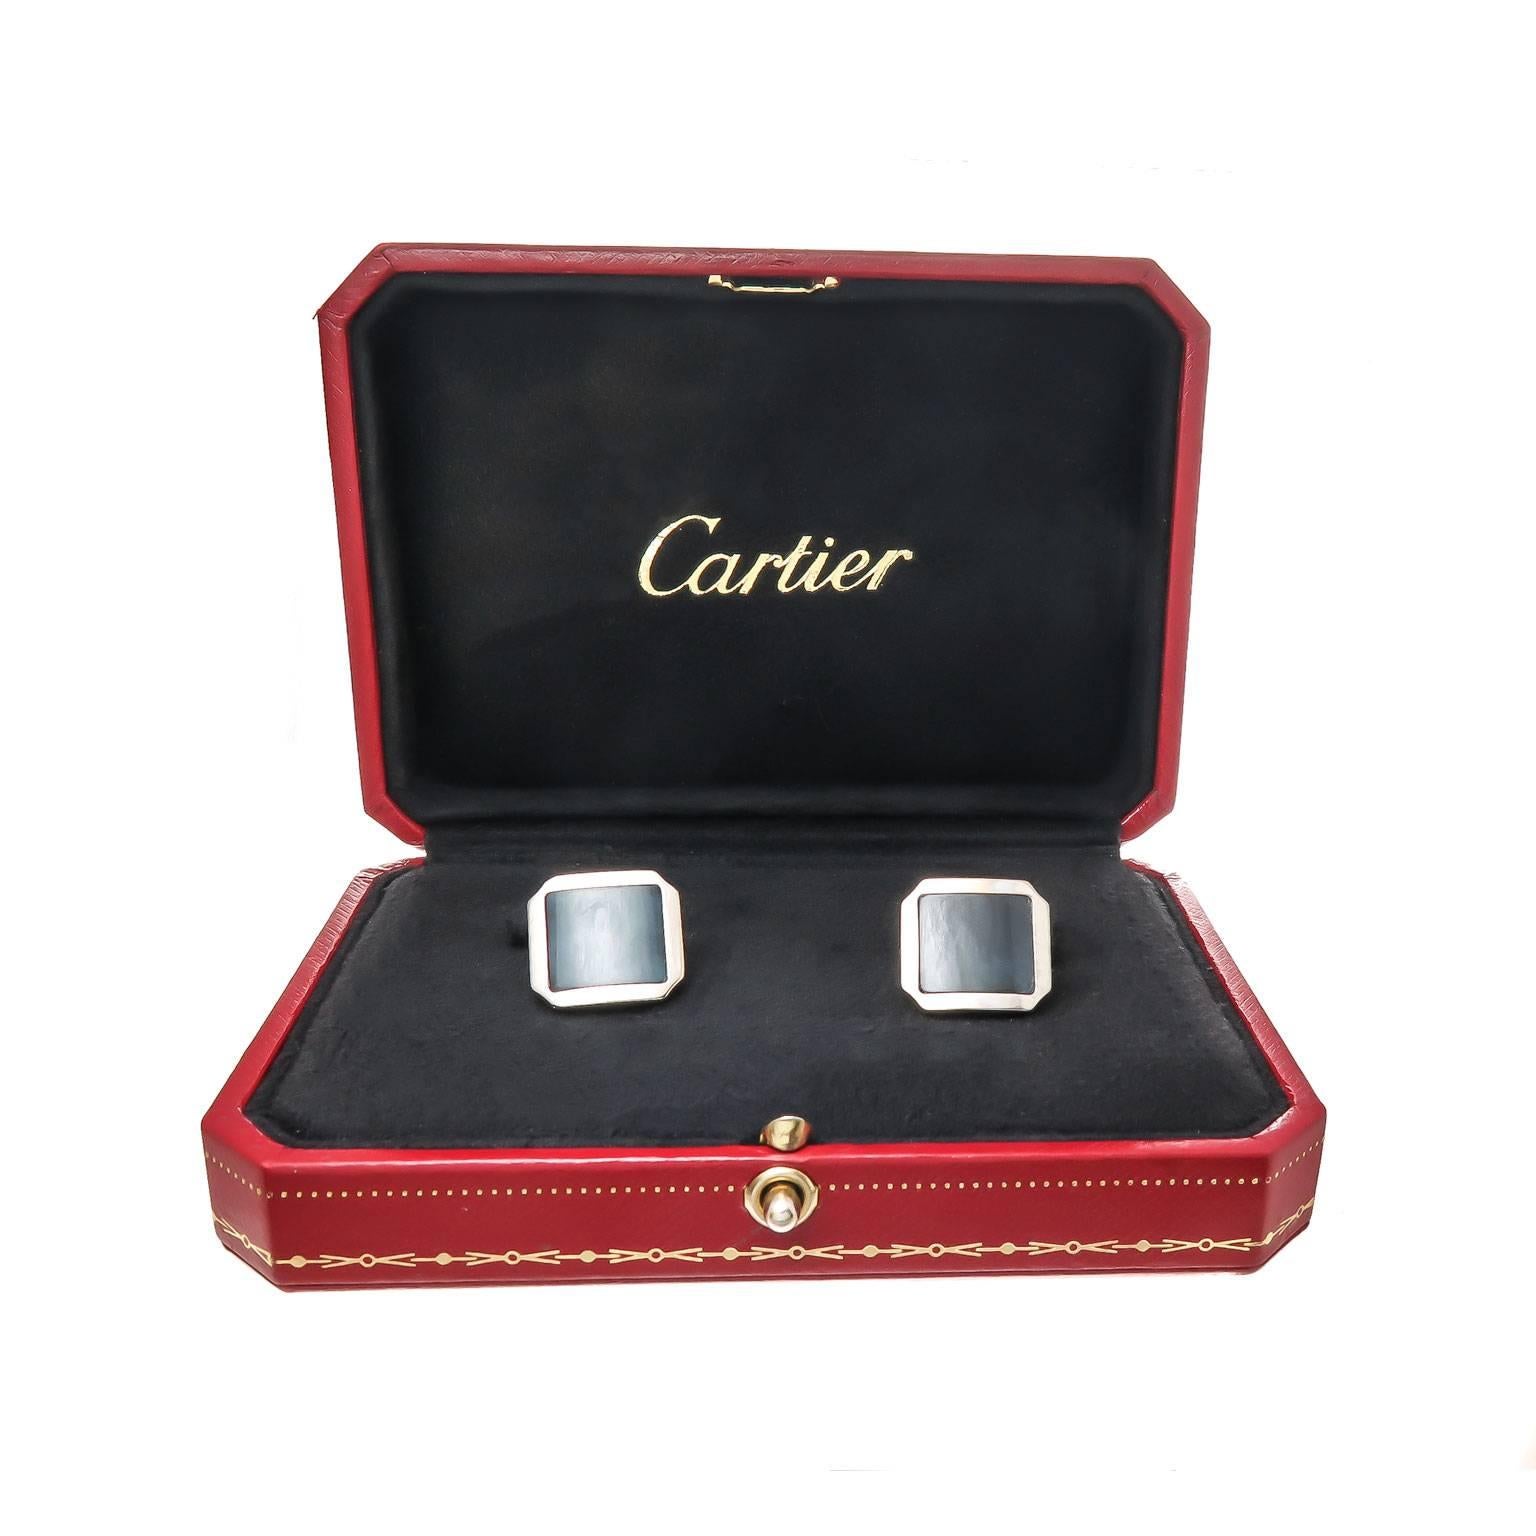 Circa 2005 Cartier 18K White Gold cufflinks set with a Charcoal Gray Quartz also known as eagle Eye Quartz. the tops measure 5/8 X 5/8 inch.  Signed and numbered and come in the original Cufflink presentation Box. 